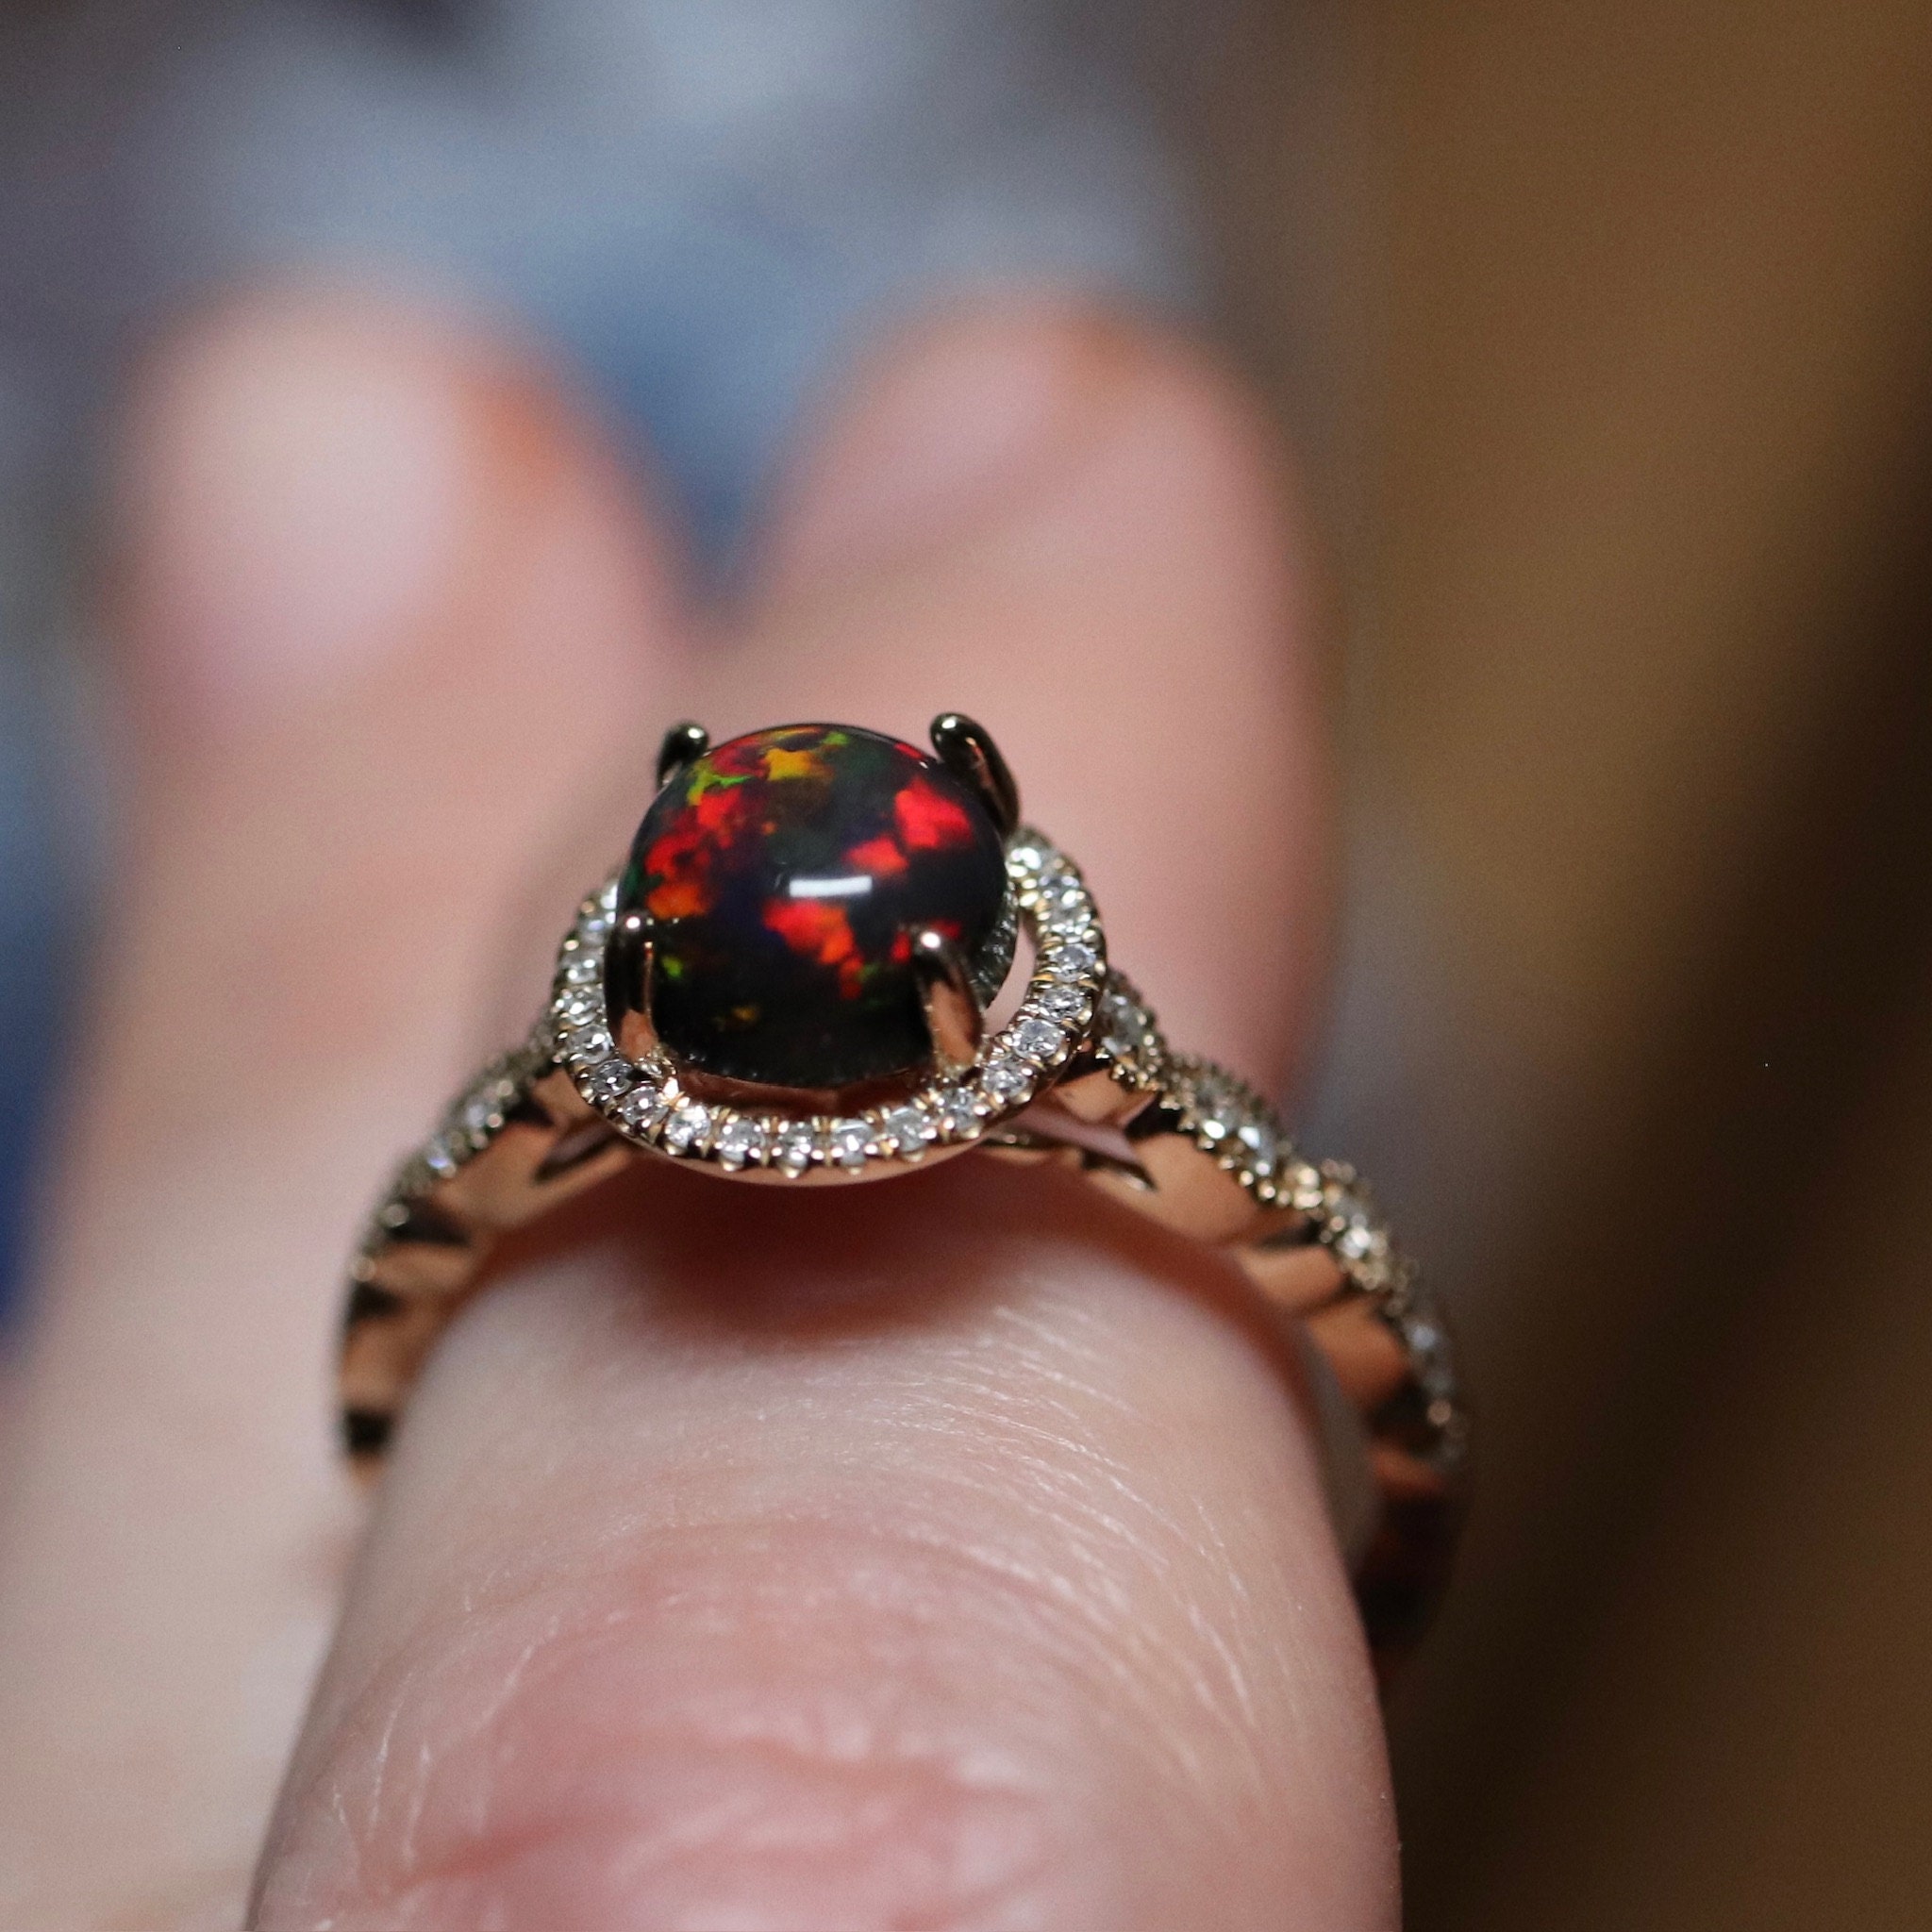 Gold ring with a black opal in the center with diamond paved halo